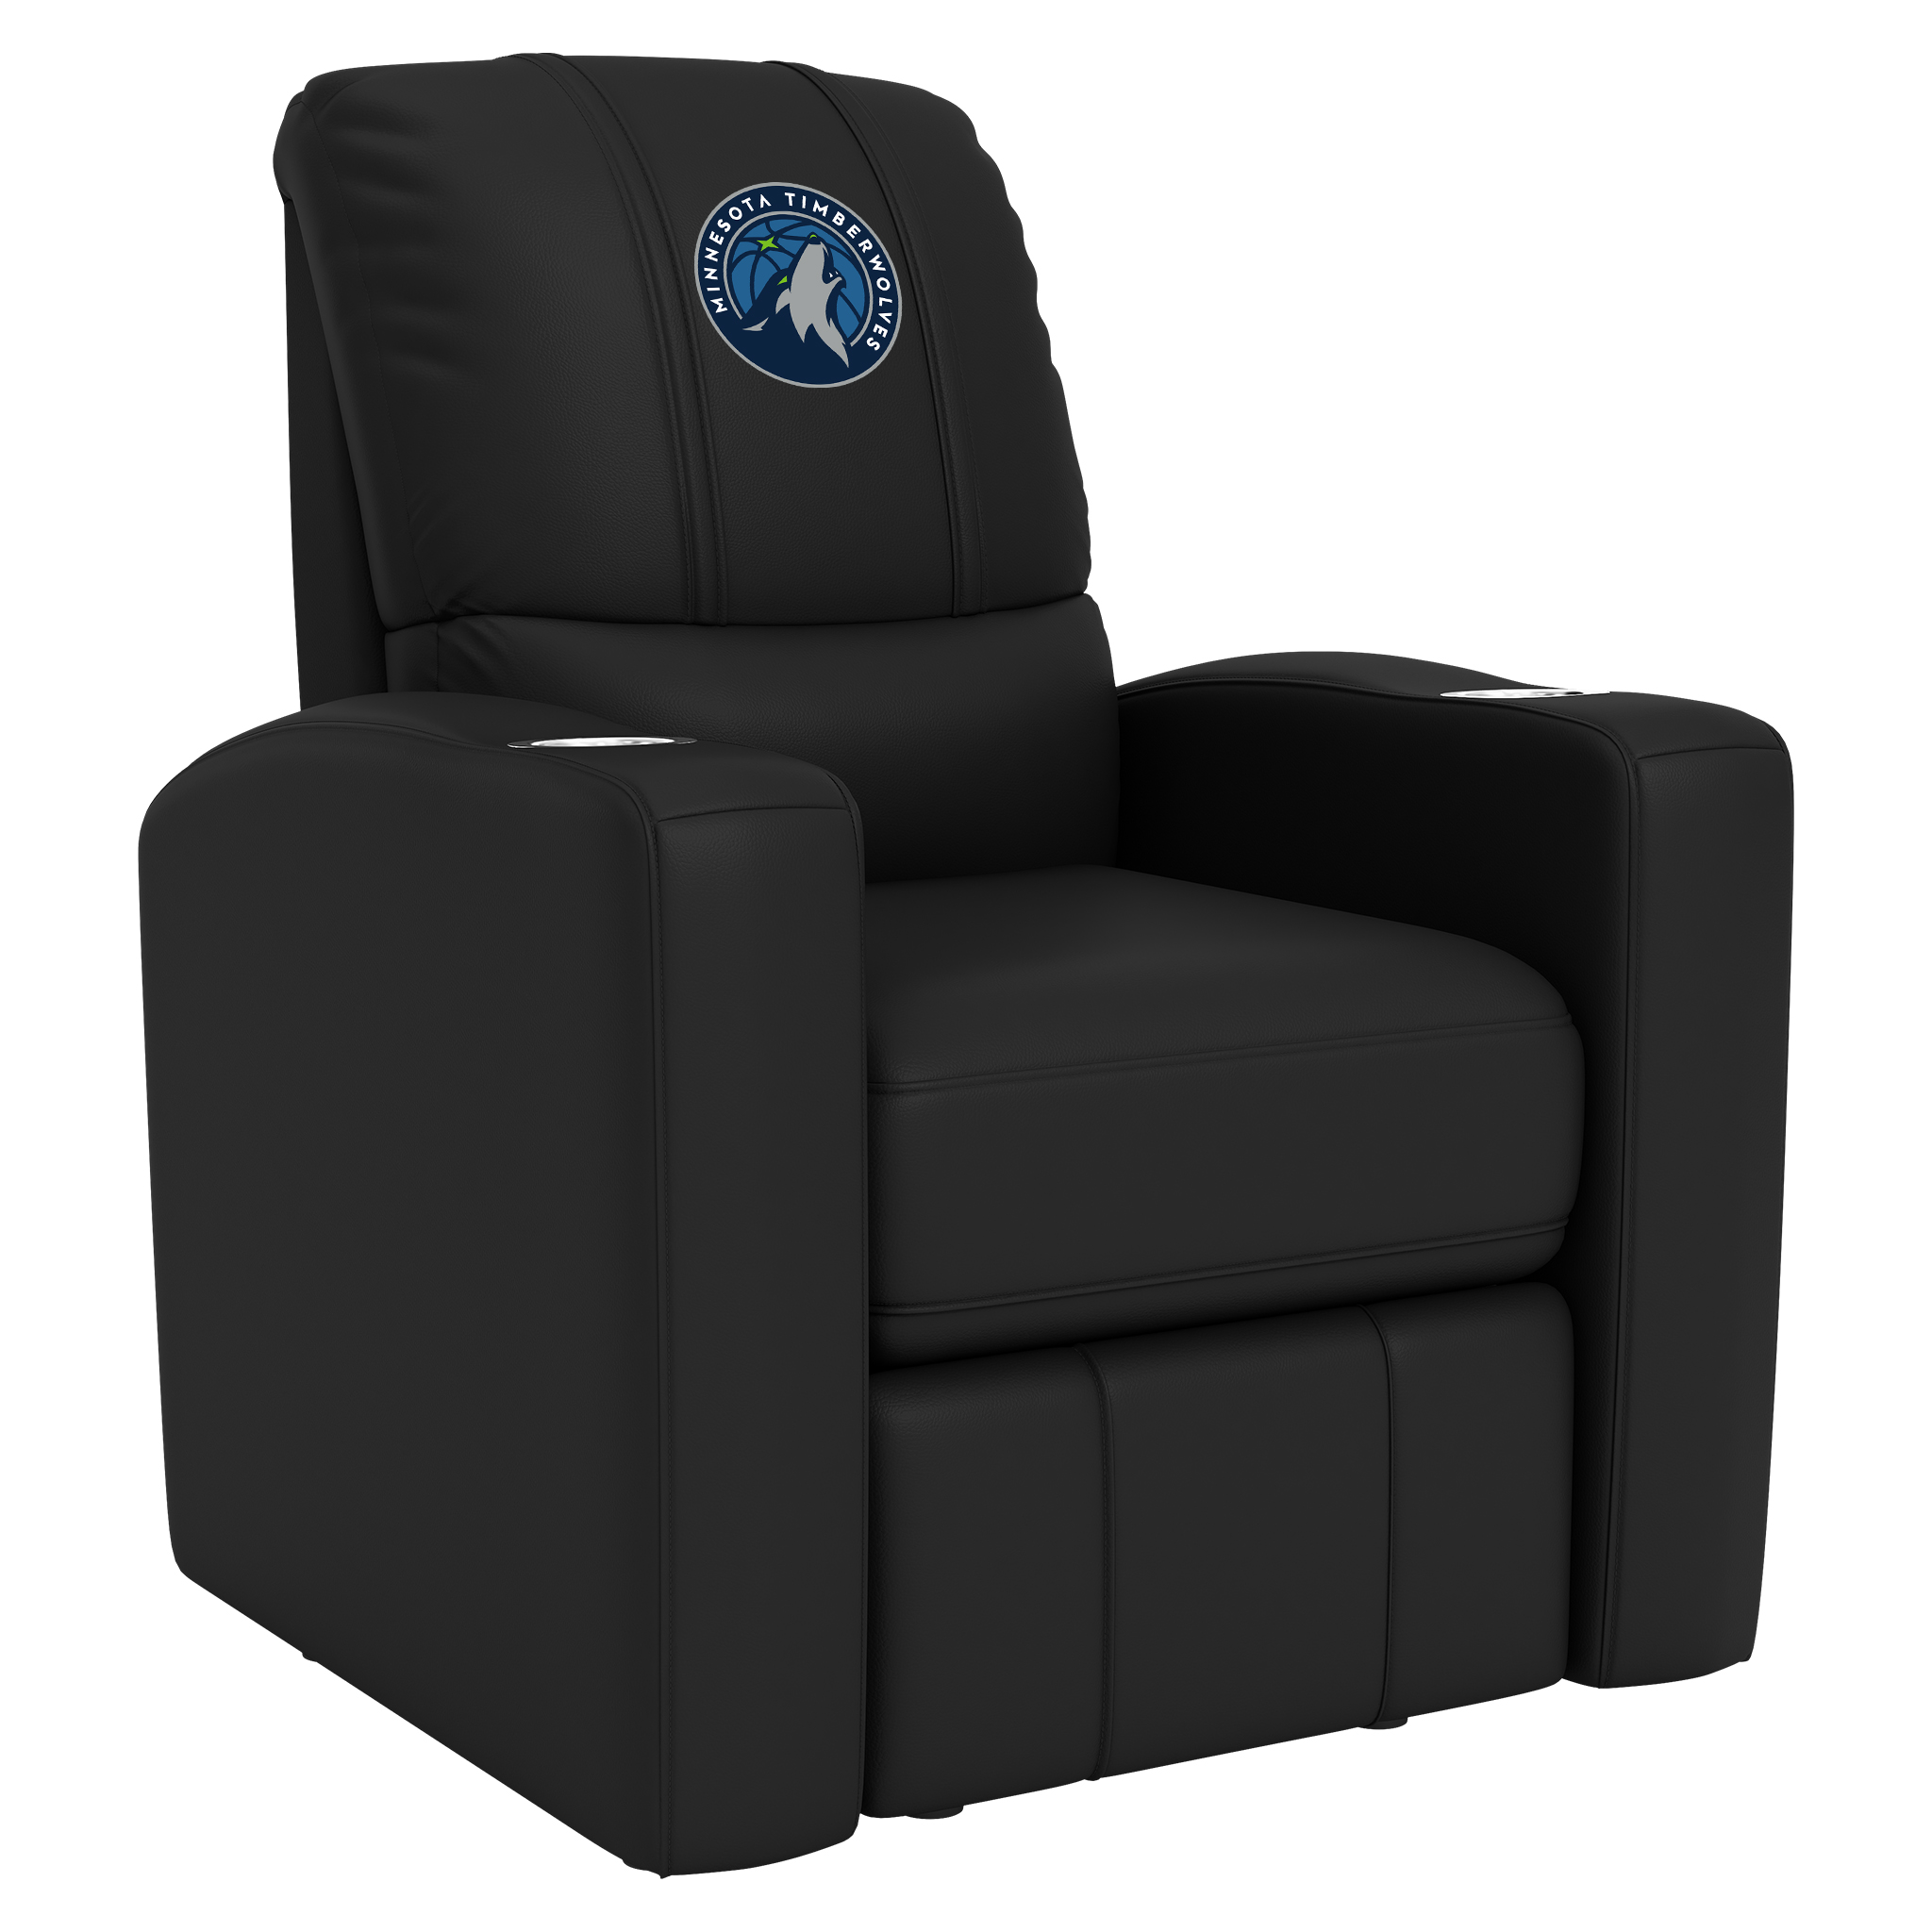 Minnesota Timberwolves Stealth Recliner with Minnesota Timberwolves Primary Logo